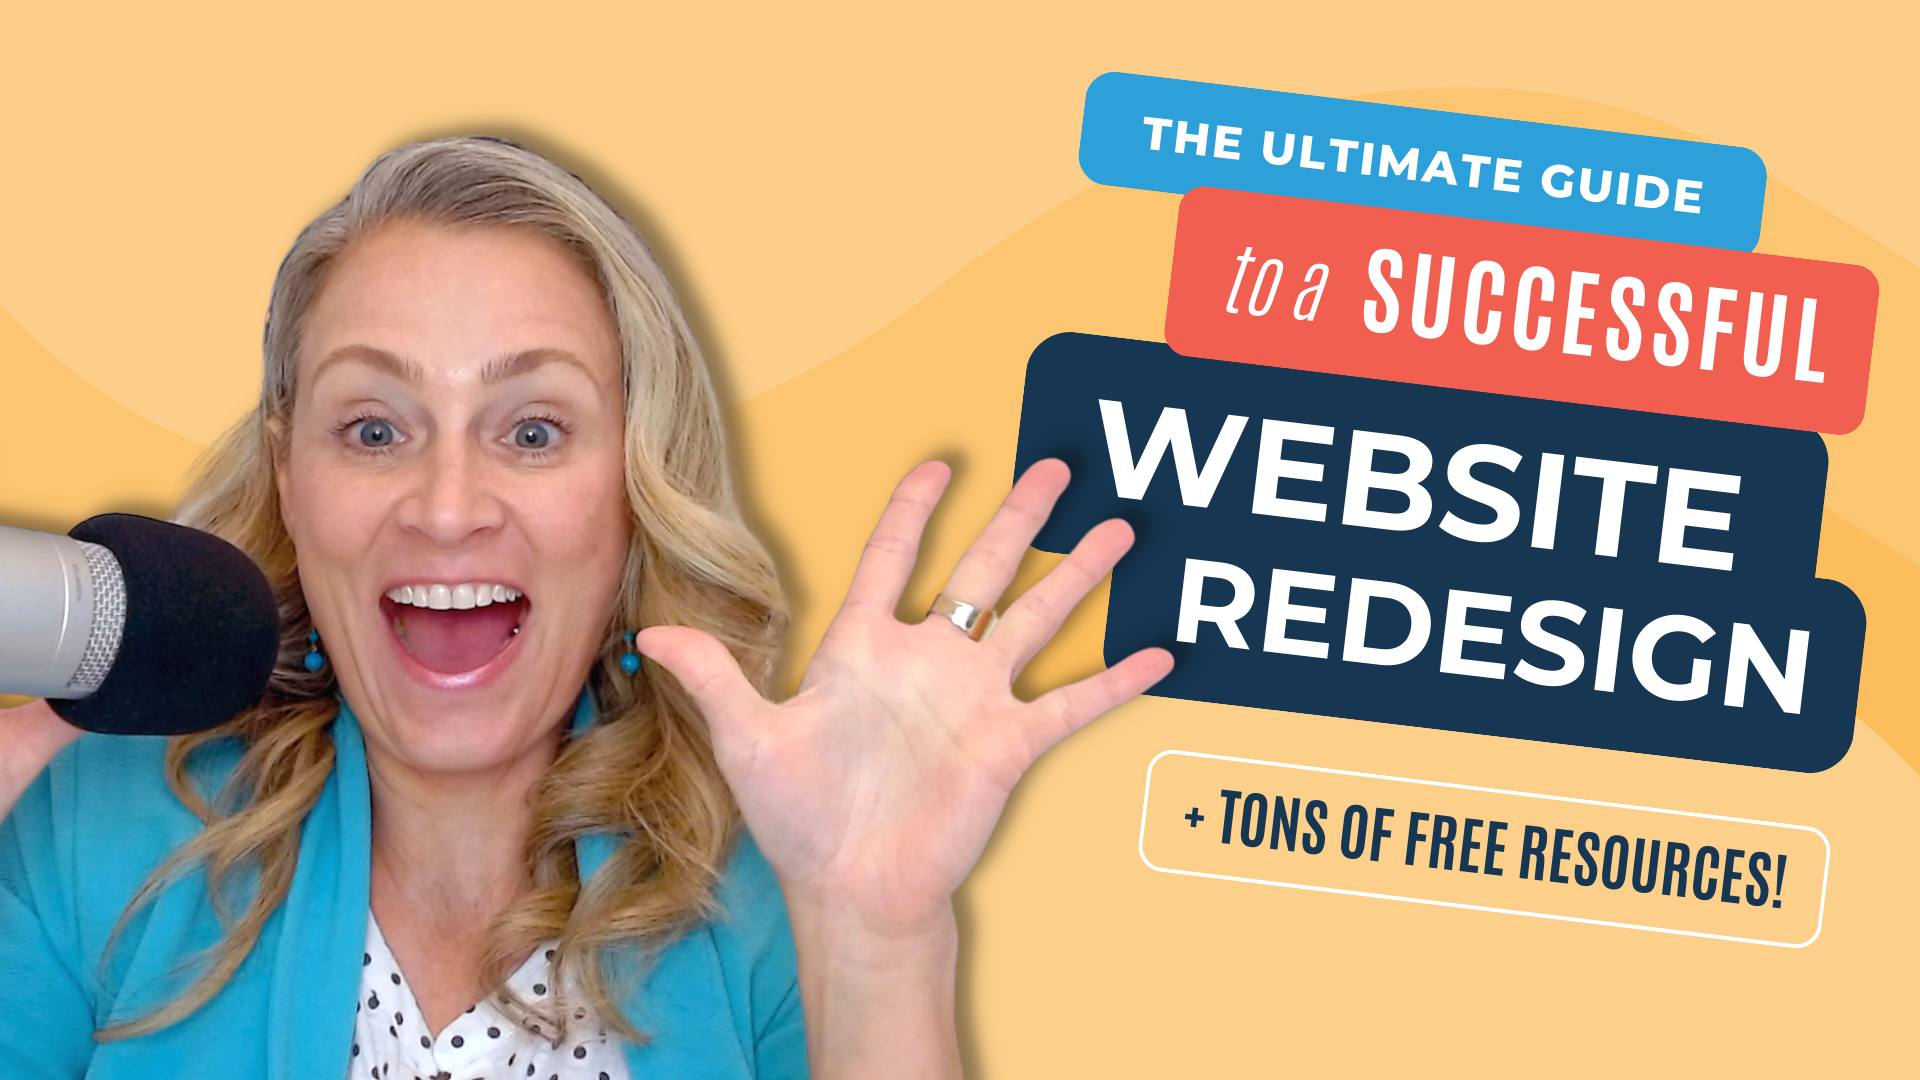 The Ultimate Guide to a Successful Website Redesign